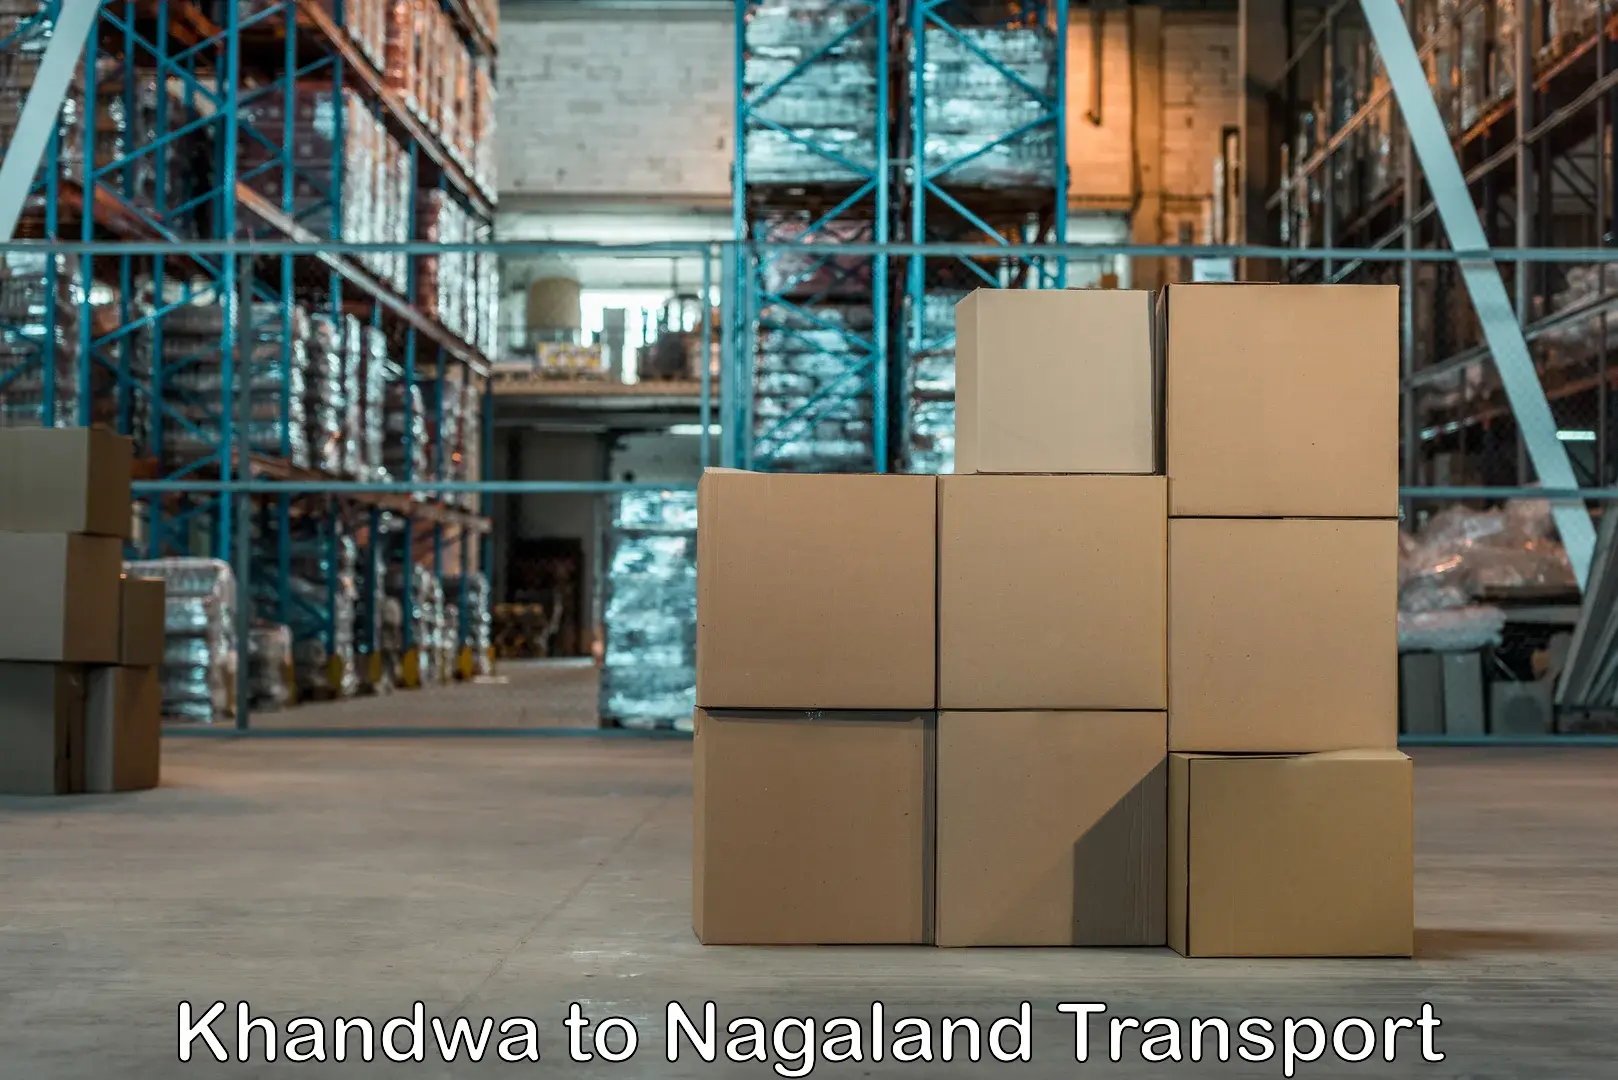 Truck transport companies in India Khandwa to Nagaland